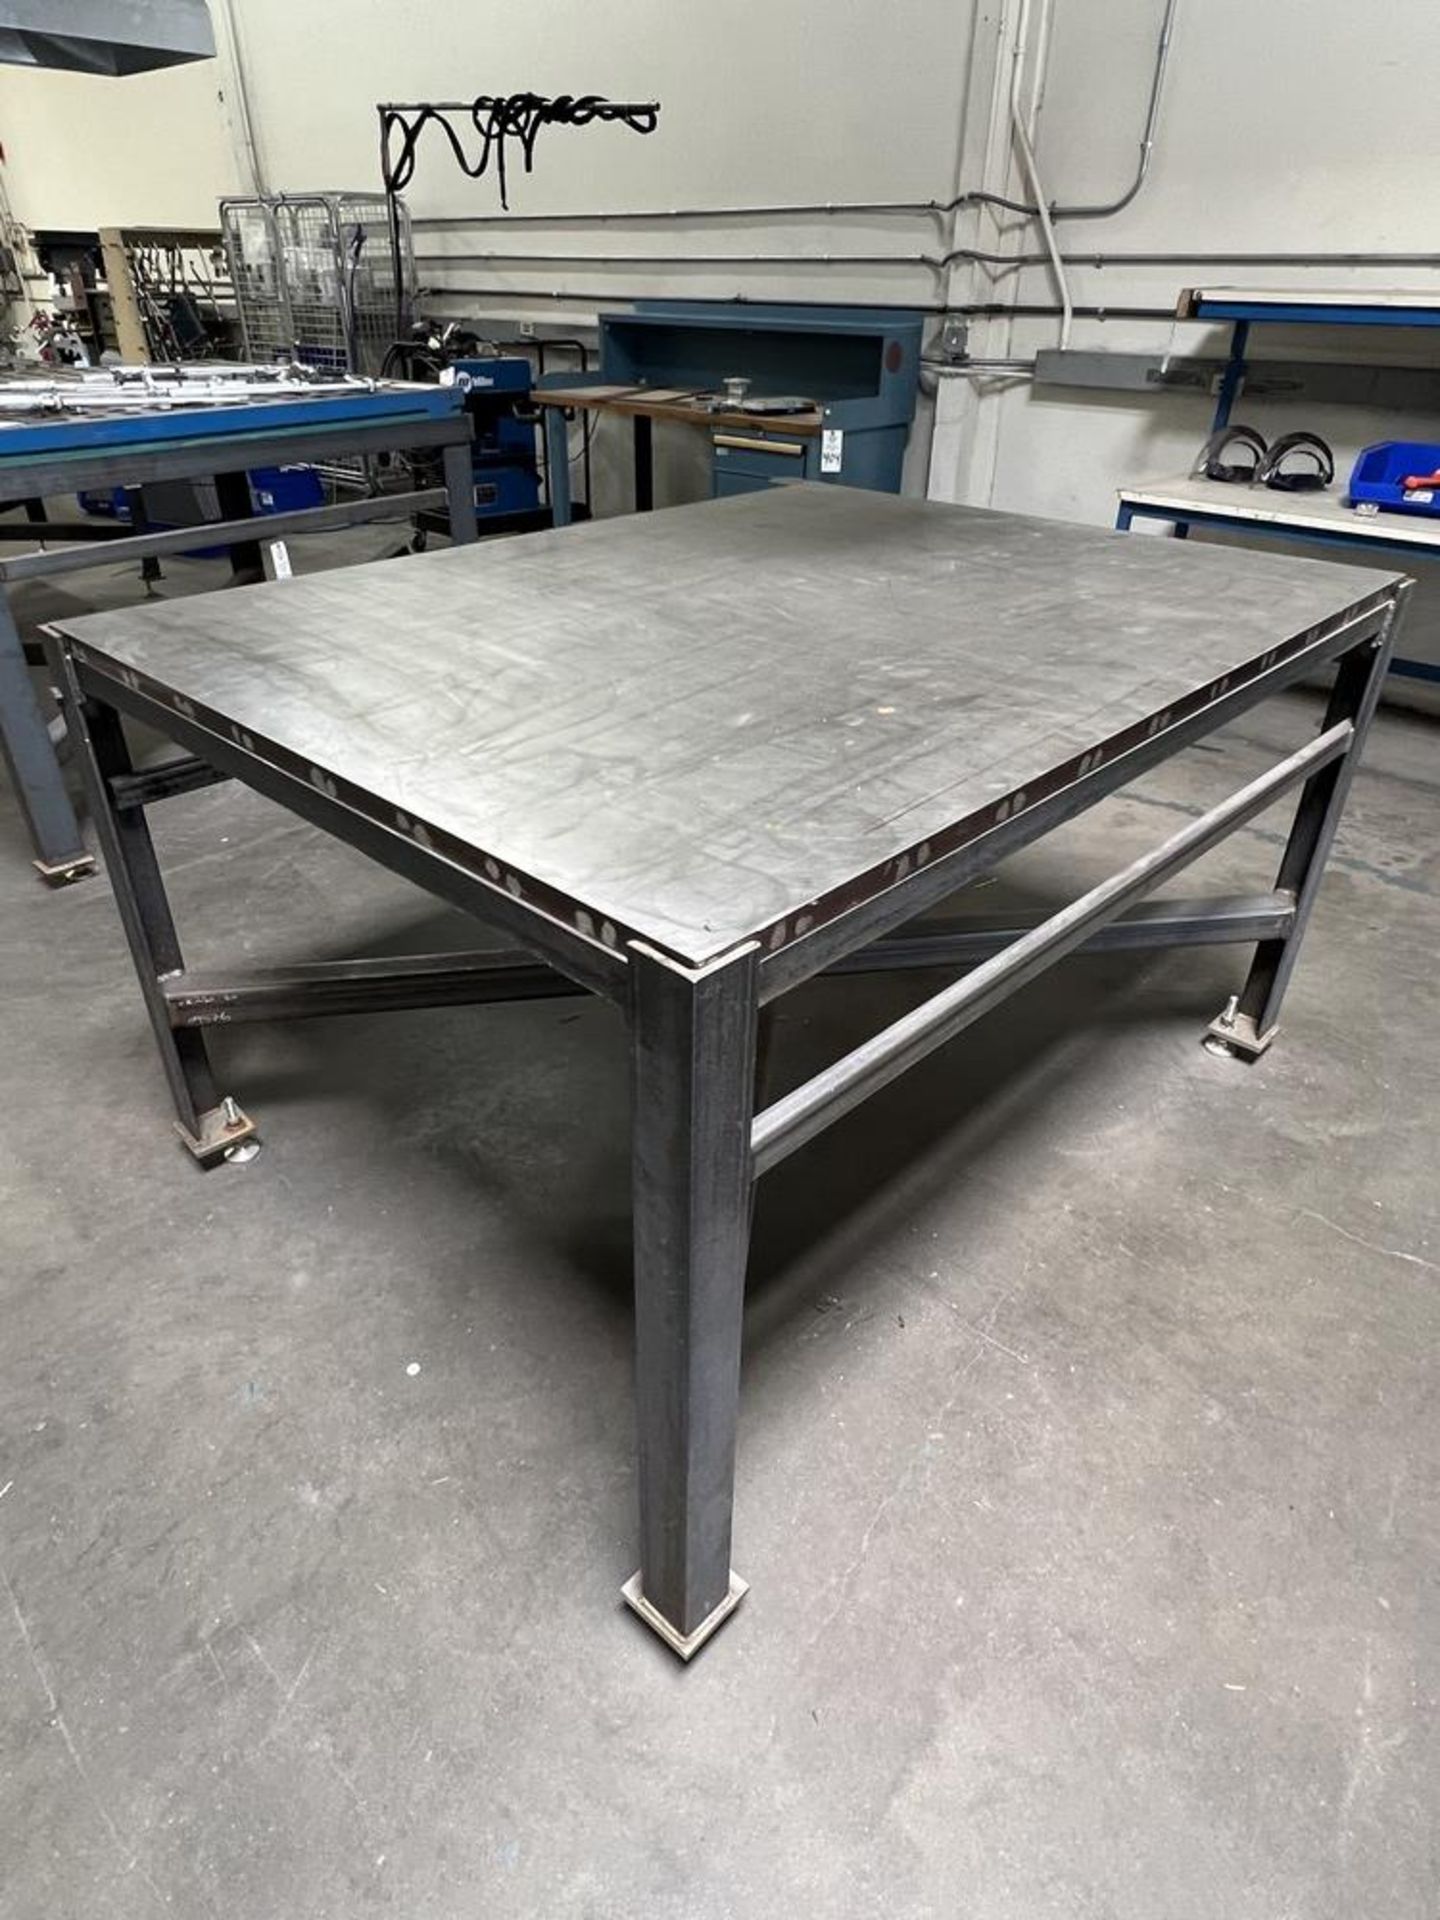 Heavy Duty 1 1/2" Stainless Steel Welding Table, 69" x 51 1/2" x 40" - Image 3 of 5